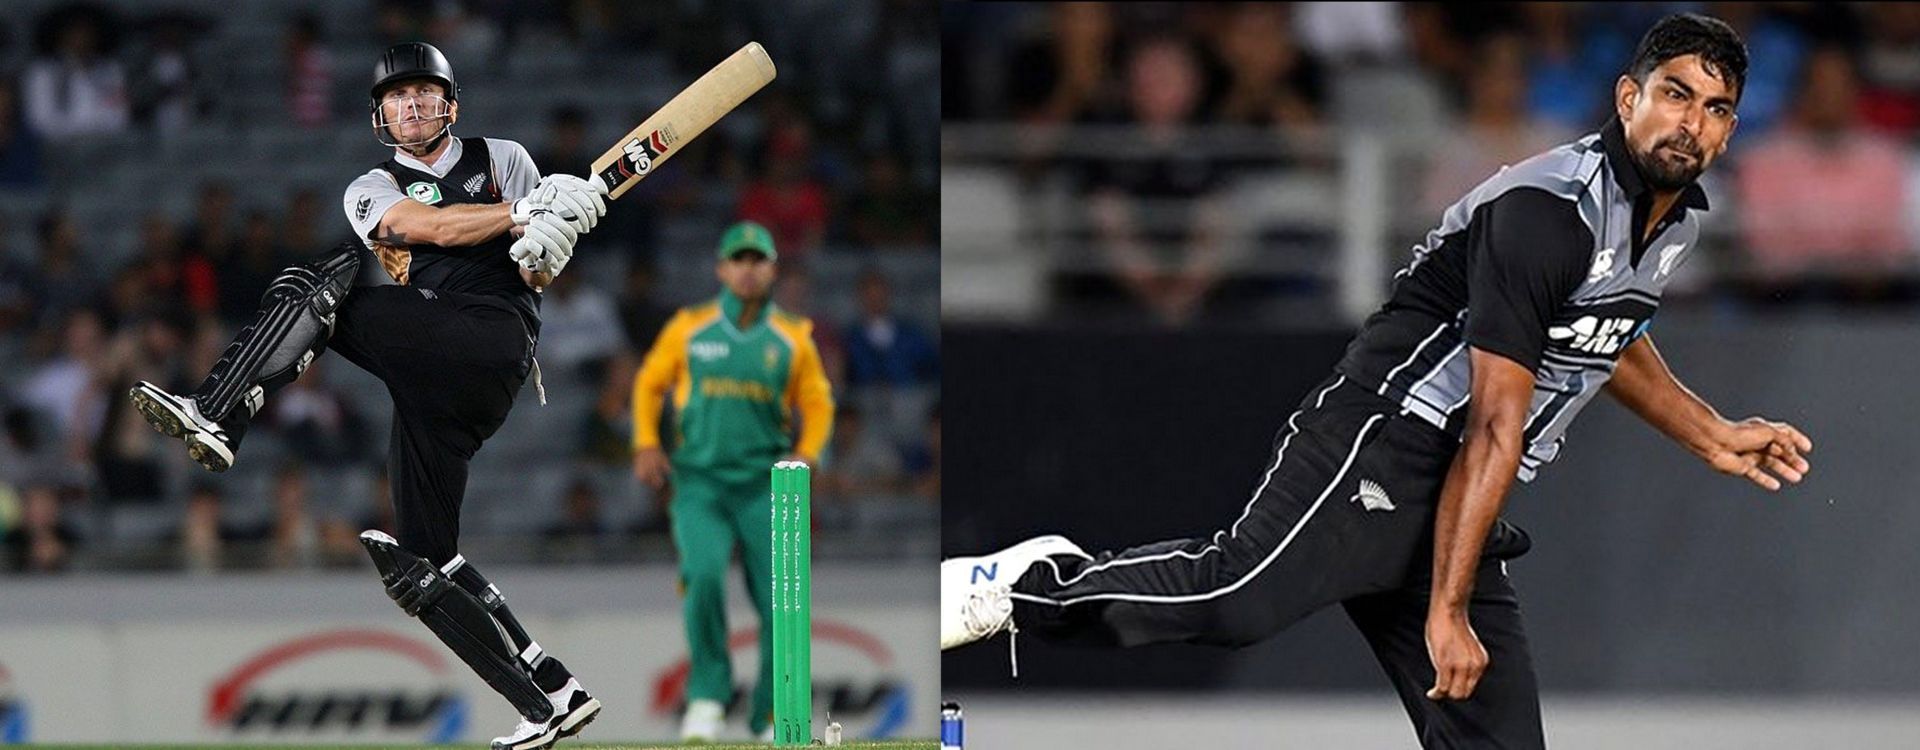 Nicol (L) backs Sodhi (R) to win New Zealand the Super 12 match against India